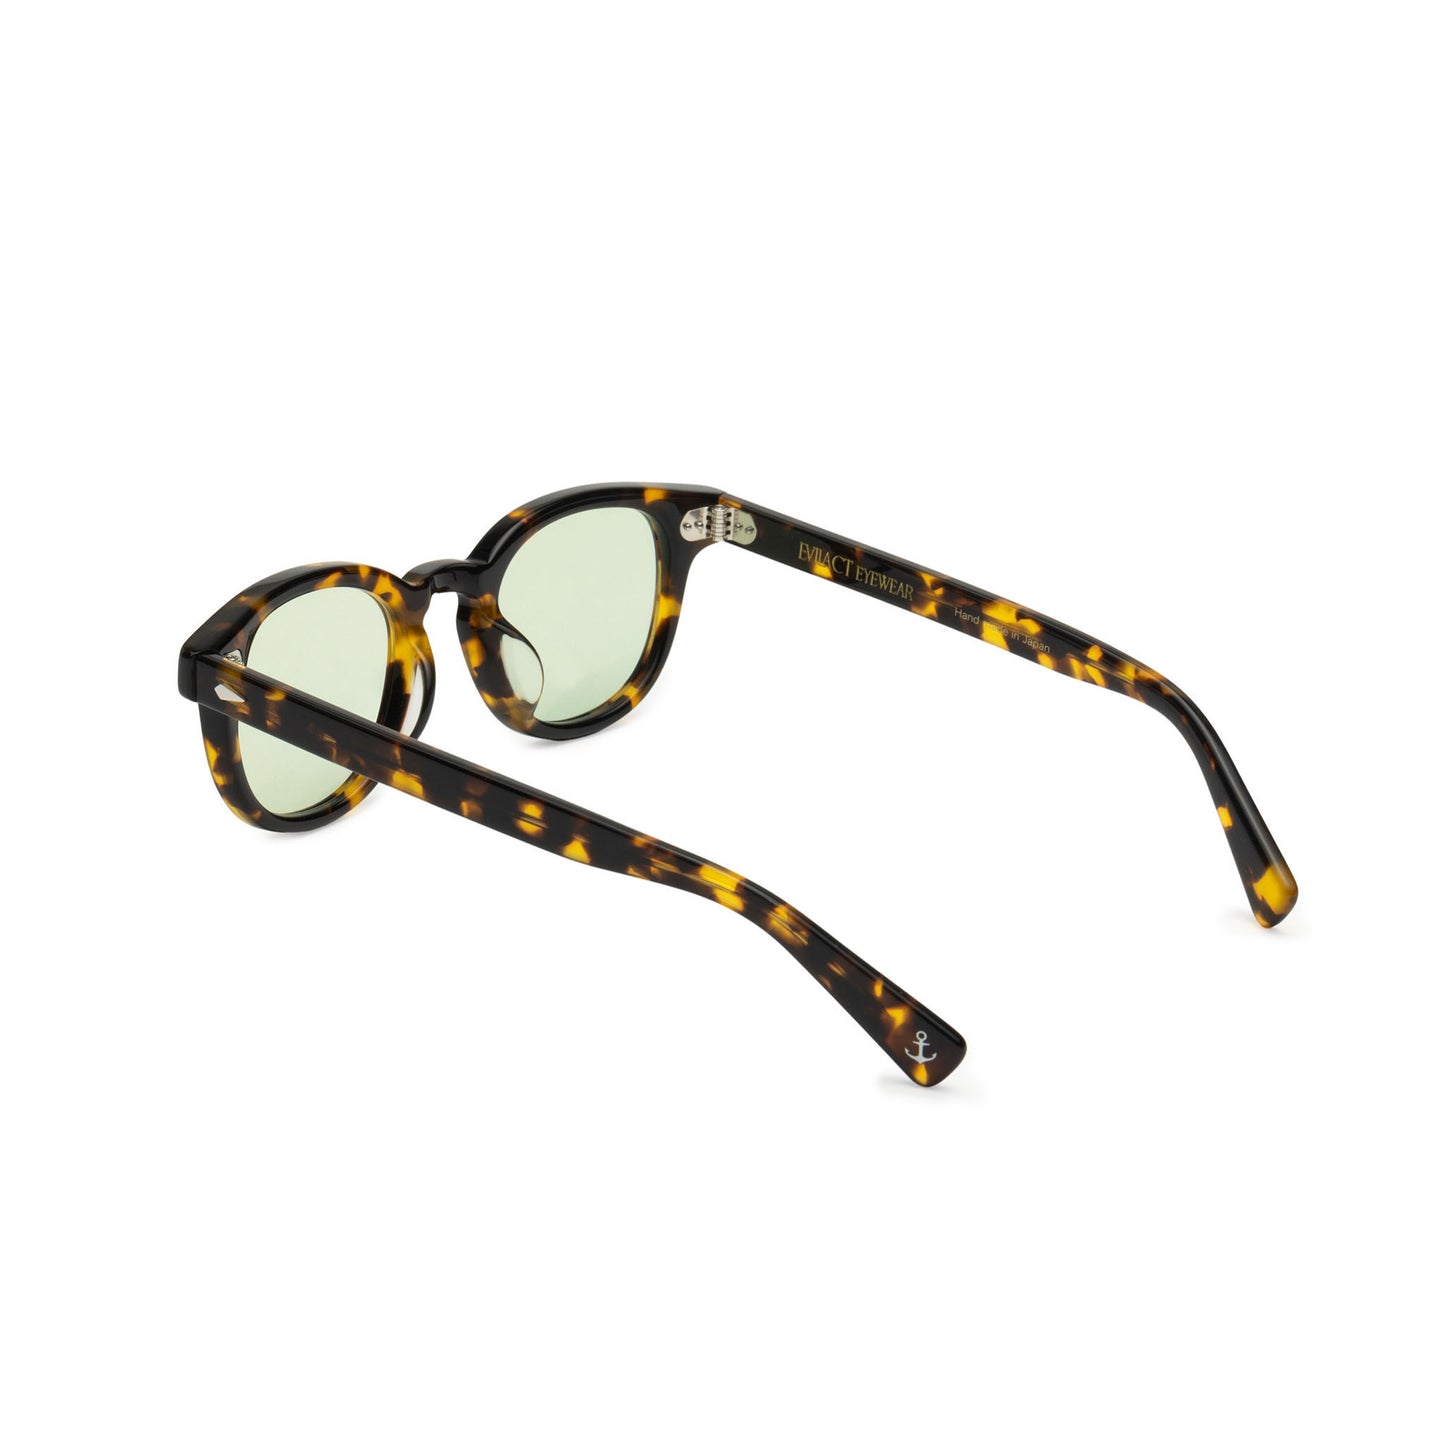 ACE yellow tort. / color photochromic green lens